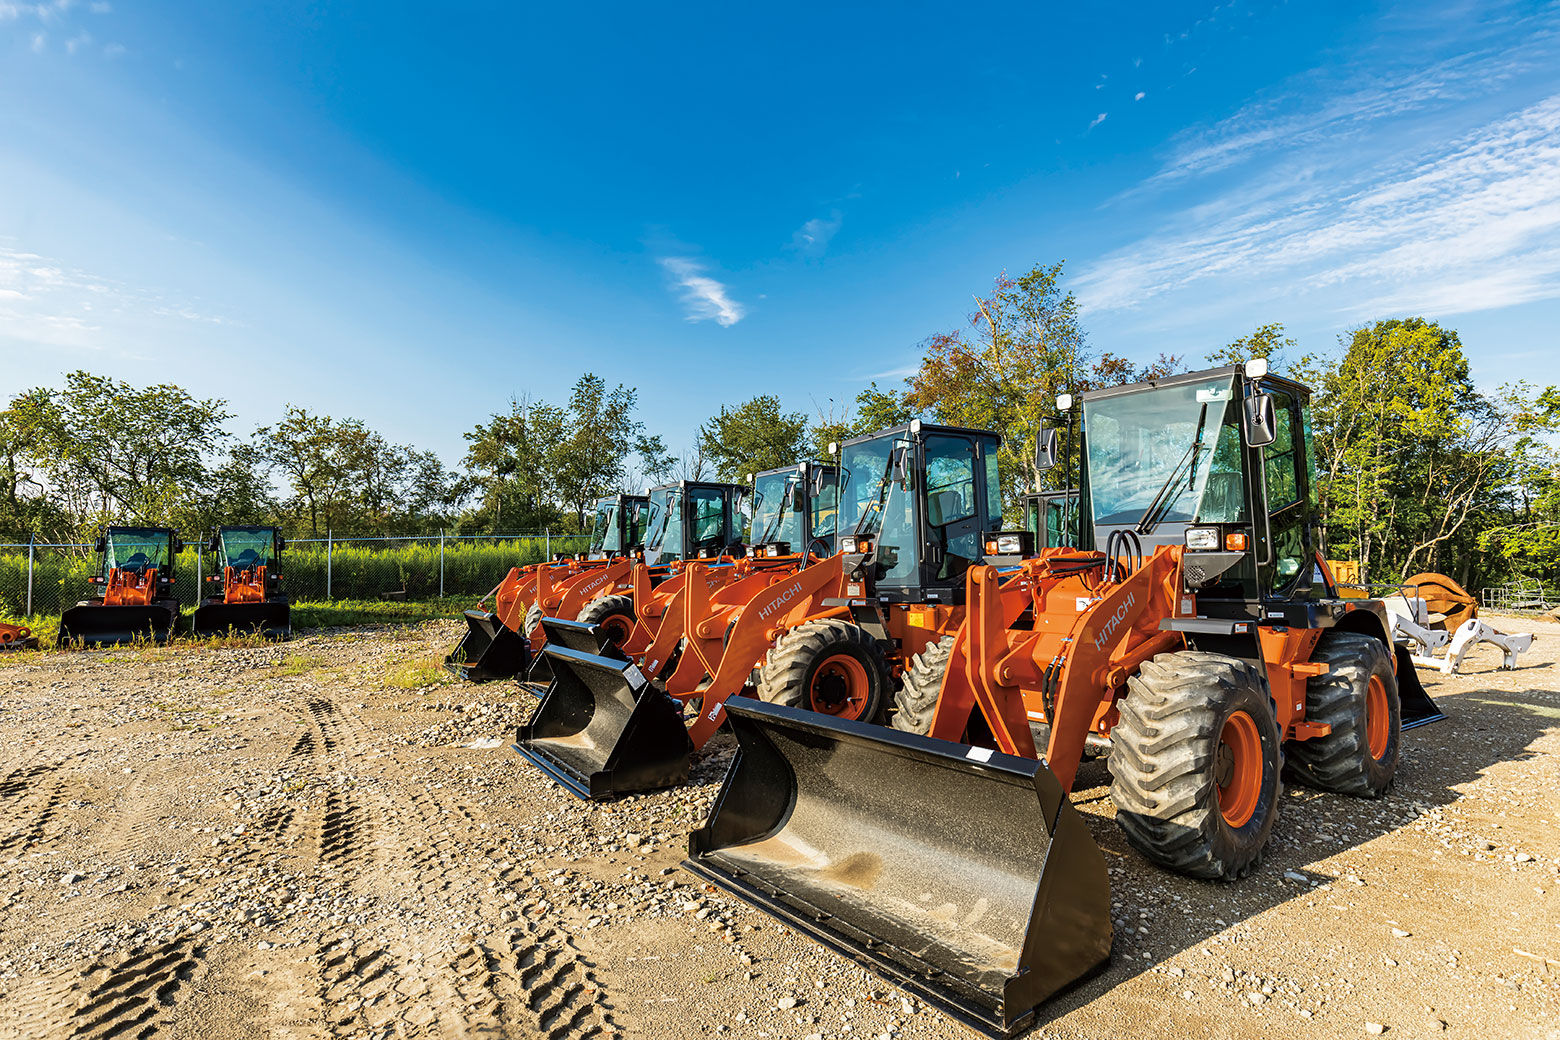 Many wheel loaders are lined up at RECO Equipment lot.